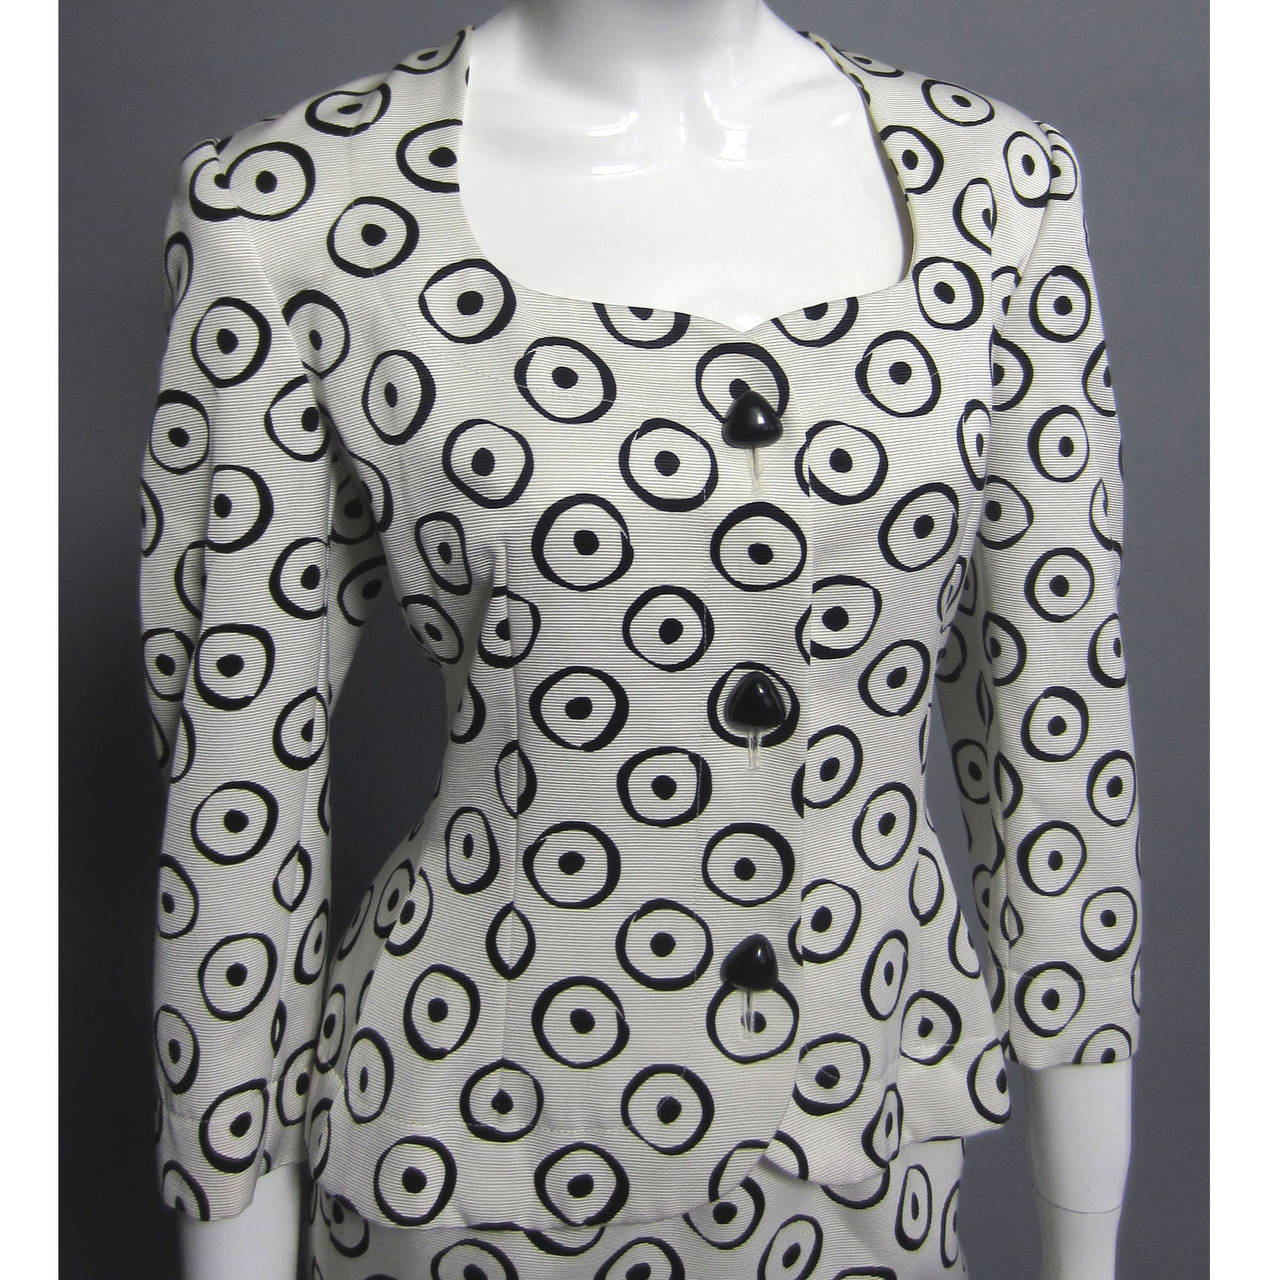 Graphic and on trend, this black and white printed silk skirt suit is a classic piece. Wear together, or wear the pieces separately. The jacket has a fitted waist and is weighted throughout the hem. Black, rounded triangle buttons are further